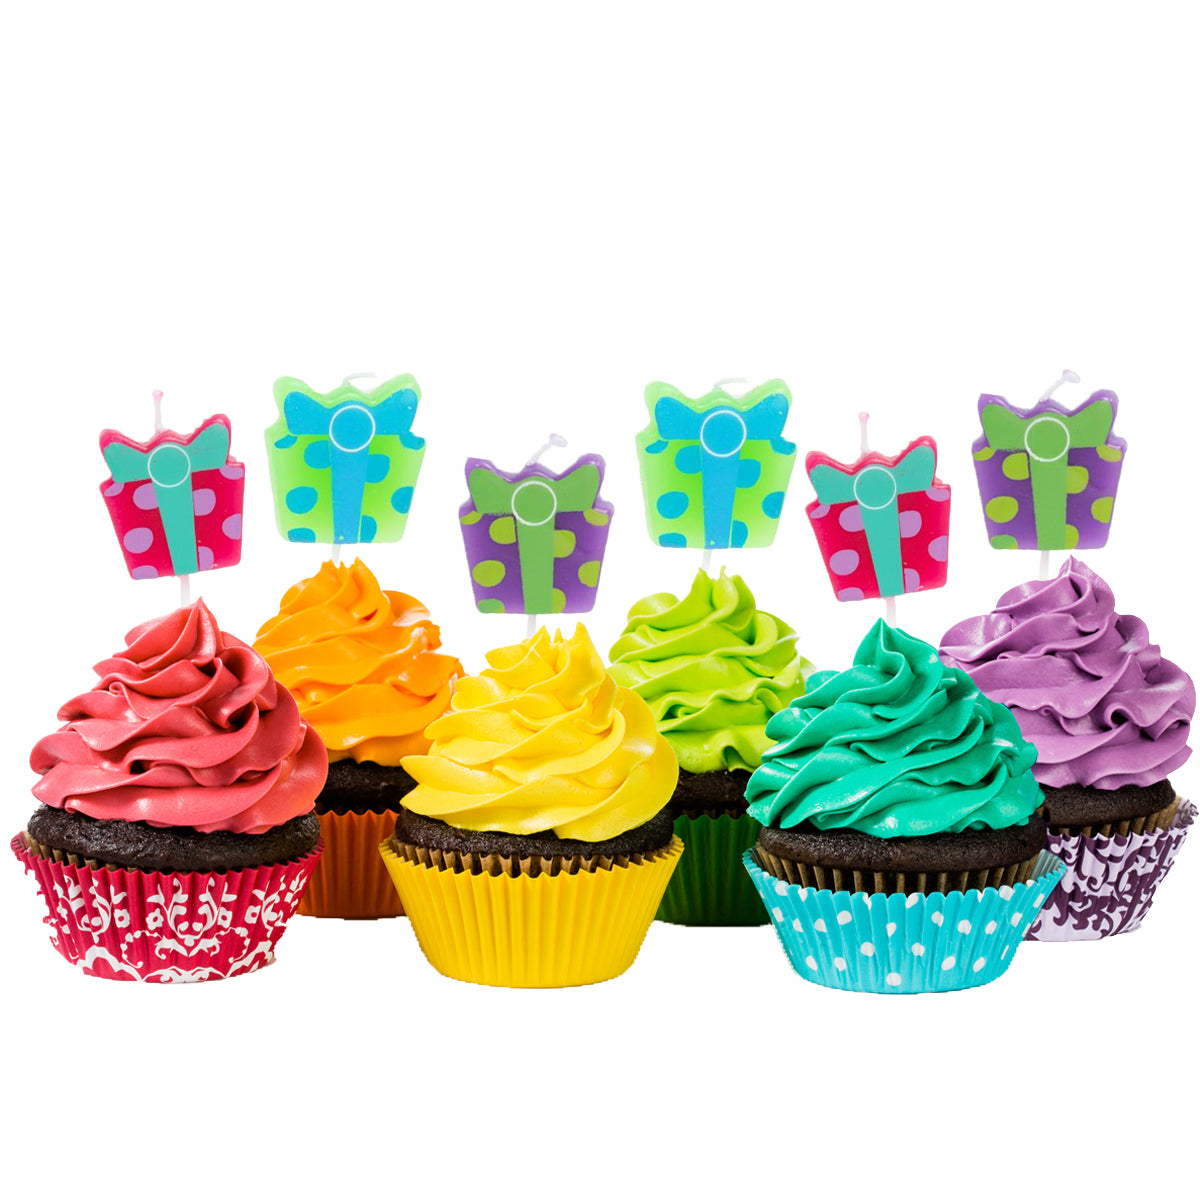 6pk Birthday Pick Candles - Sunflowers, Cupcakes or Gift Boxes